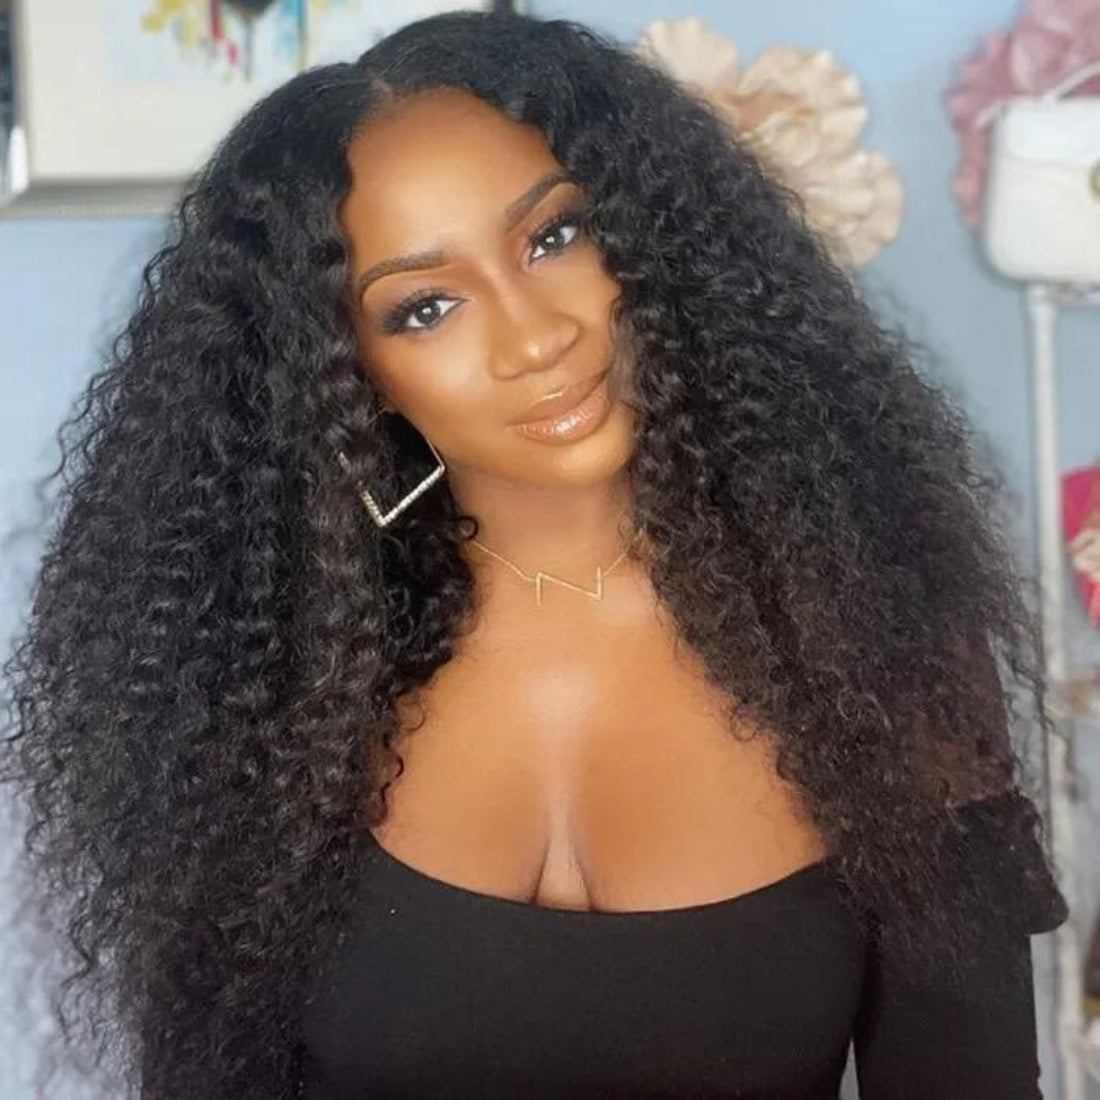 Glueless V Part Wig Free Part Thin Part Wig Curly Human Hair Wigs Can Part Anyway Upgrade U part Wig Without Leave out - Seyna Hair